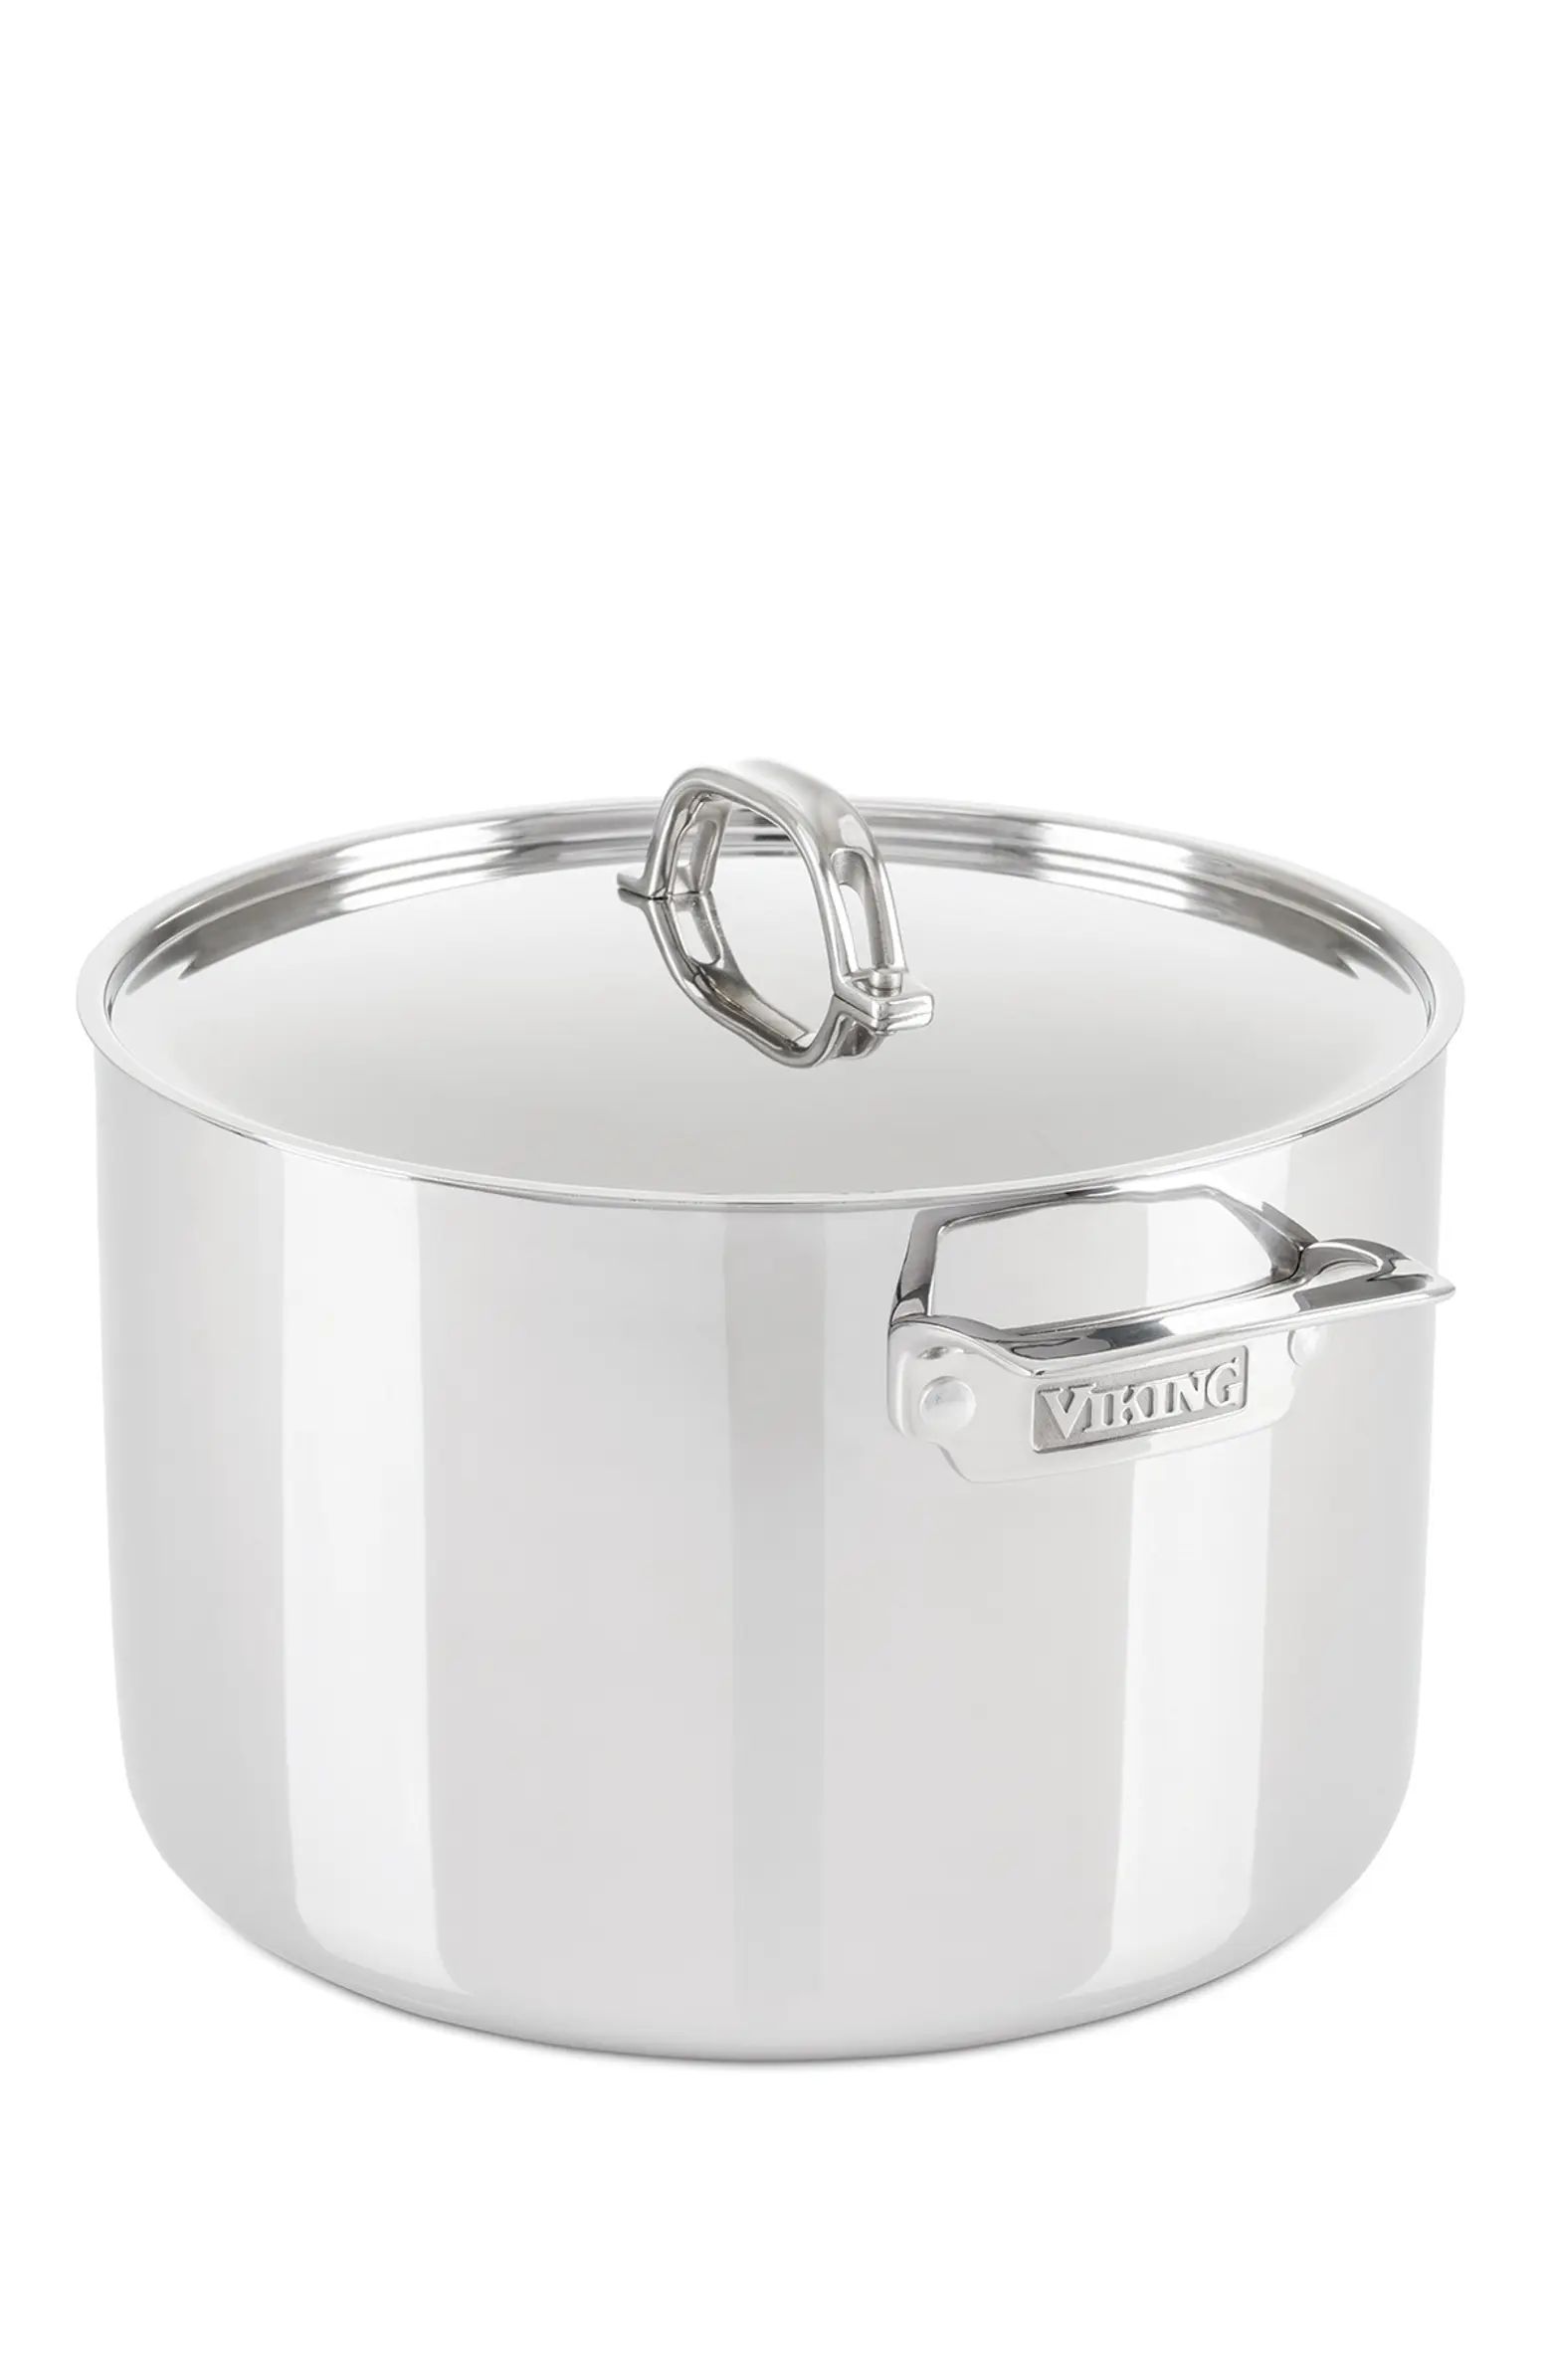 Viking 3-Ply 12 Quart Mirror Finish Stainless Steel Stock Pot with Metal Lid | Nordstrom | Nordstrom